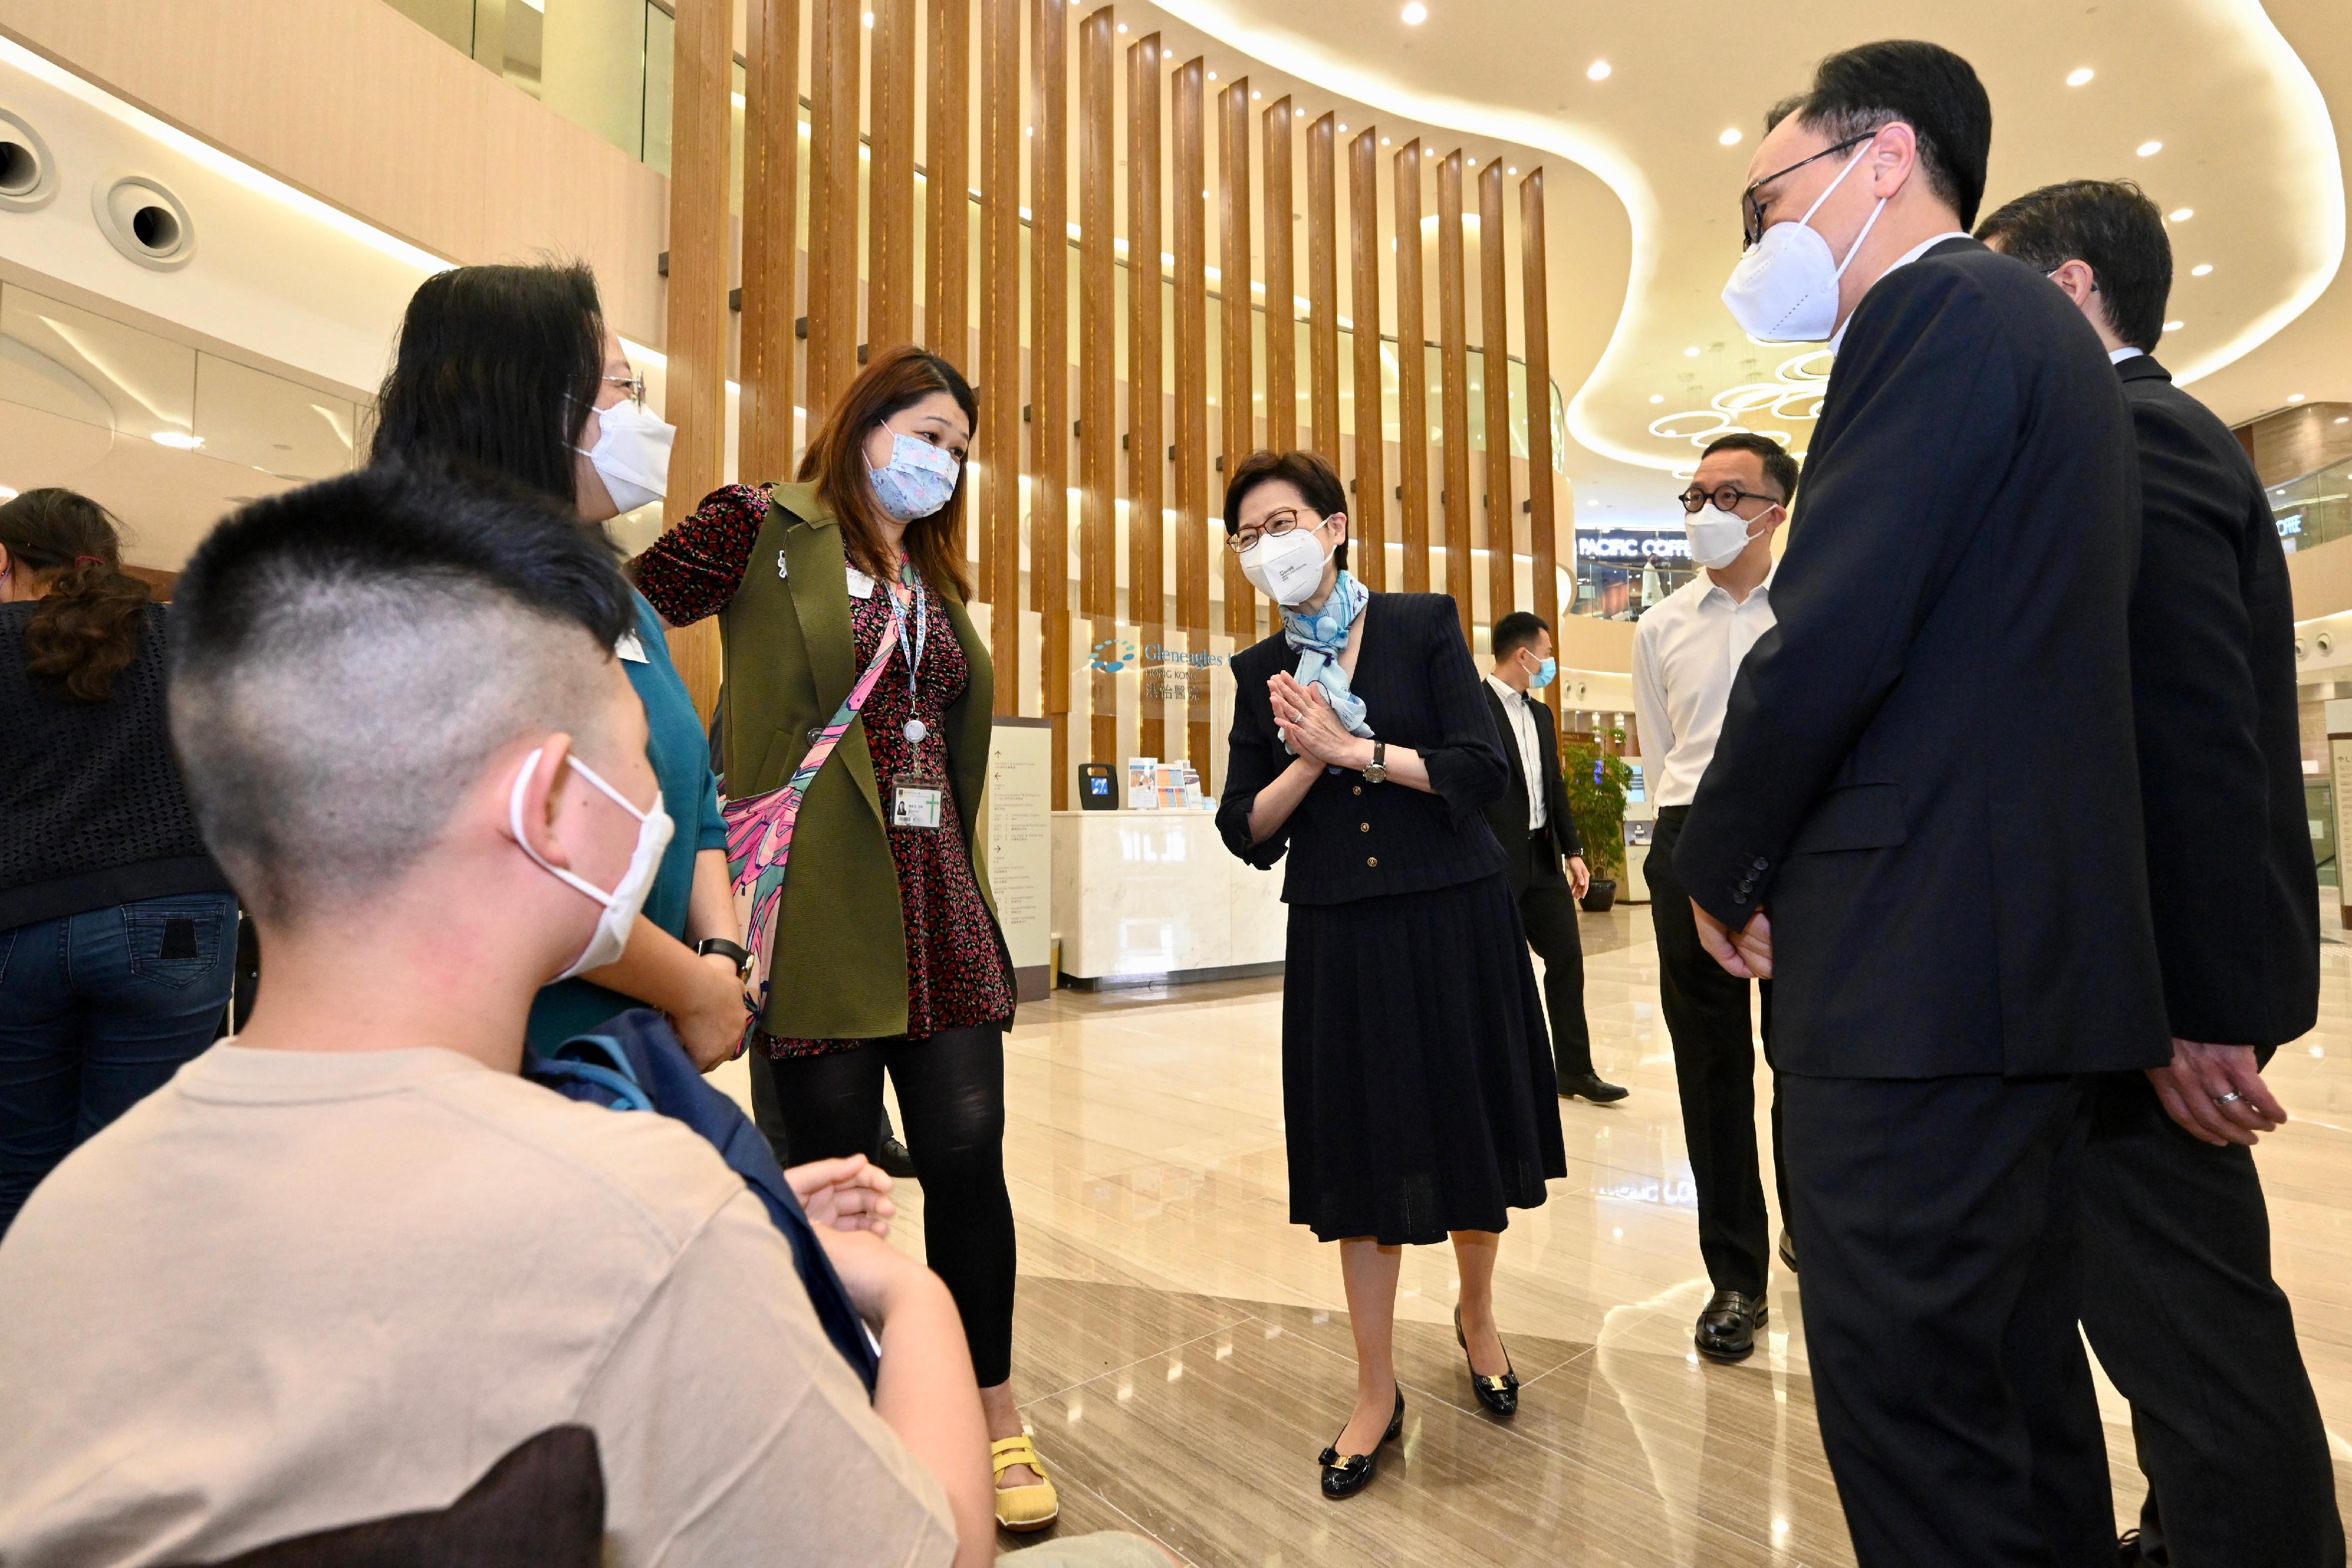 The Chief Executive, Mrs Carrie Lam, visited the HKU Children Community Vaccination Centre at Gleneagles Hospital Hong Kong today (March 18). Photo shows Mrs Lam (third right) chatting with a child waiting to get vaccinated. Looking on are the Secretary for the Civil Service, Mr Patrick Nip (first right), and the Dean of Medicine of the University of Hong Kong, Professor Gabriel Leung (second right).